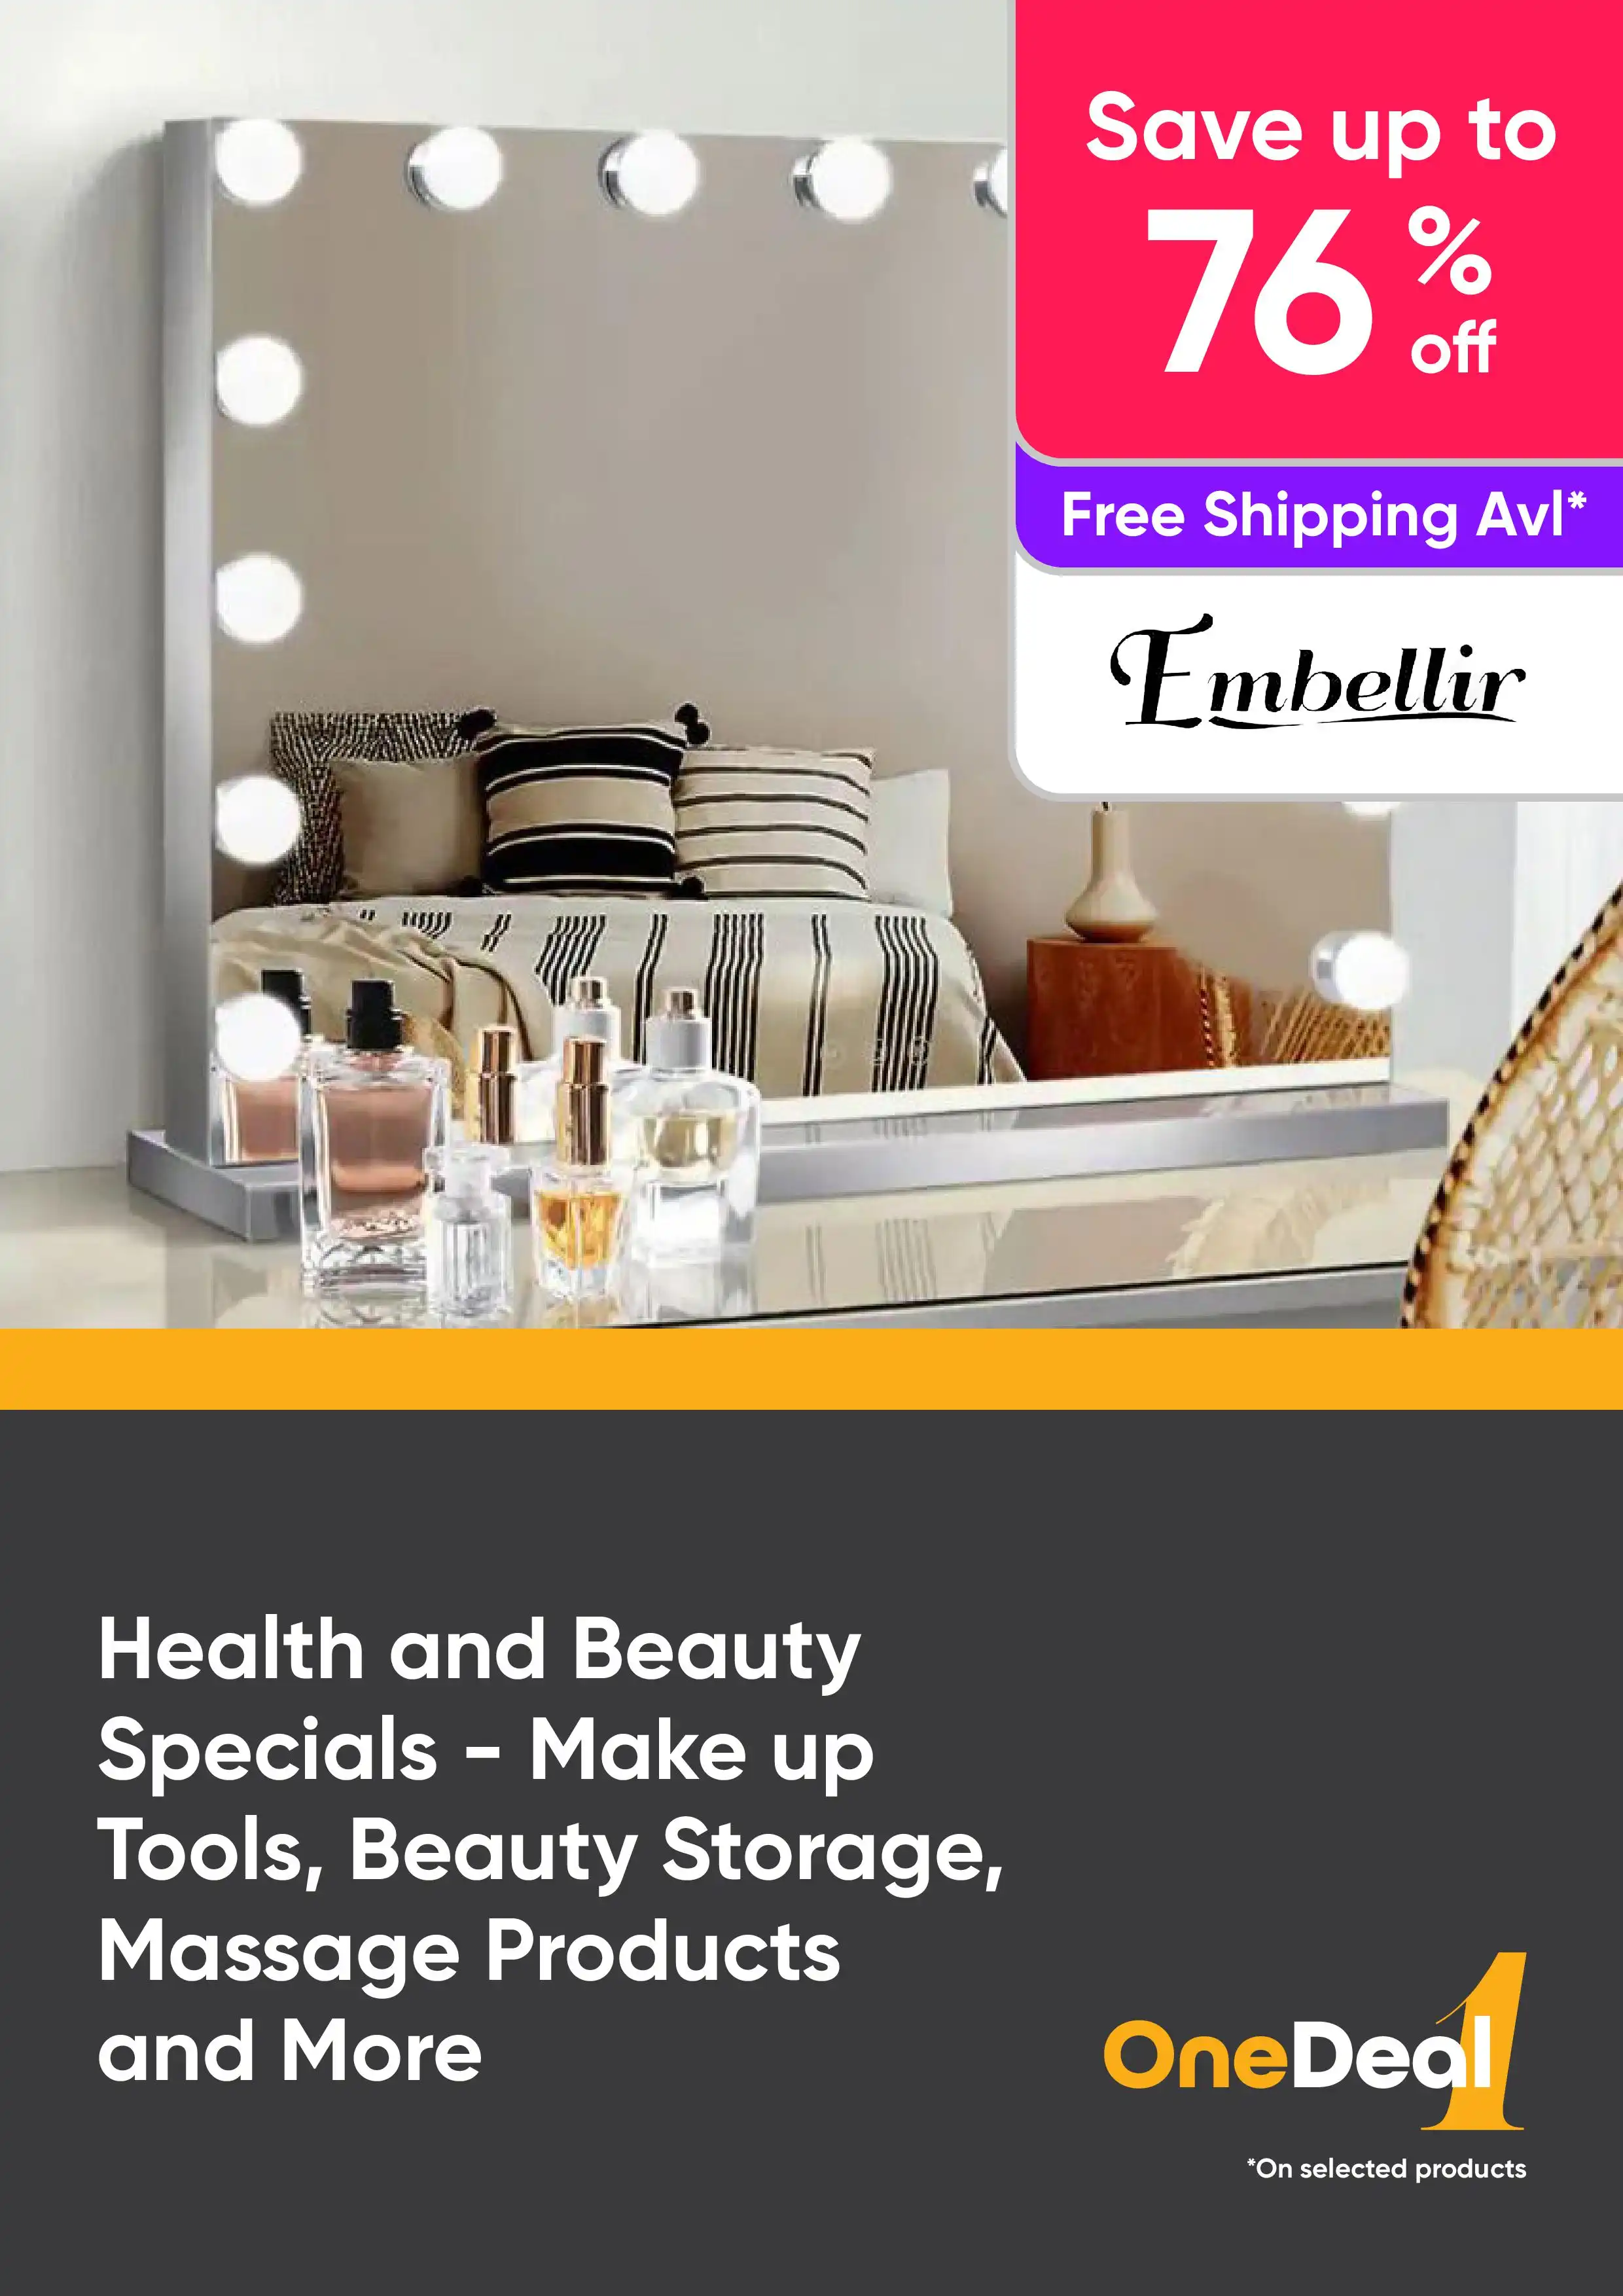 Health and Beauty Specials - Make Up Tools, Beauty Storage, Massage Products and More - Save Up to 76% Off